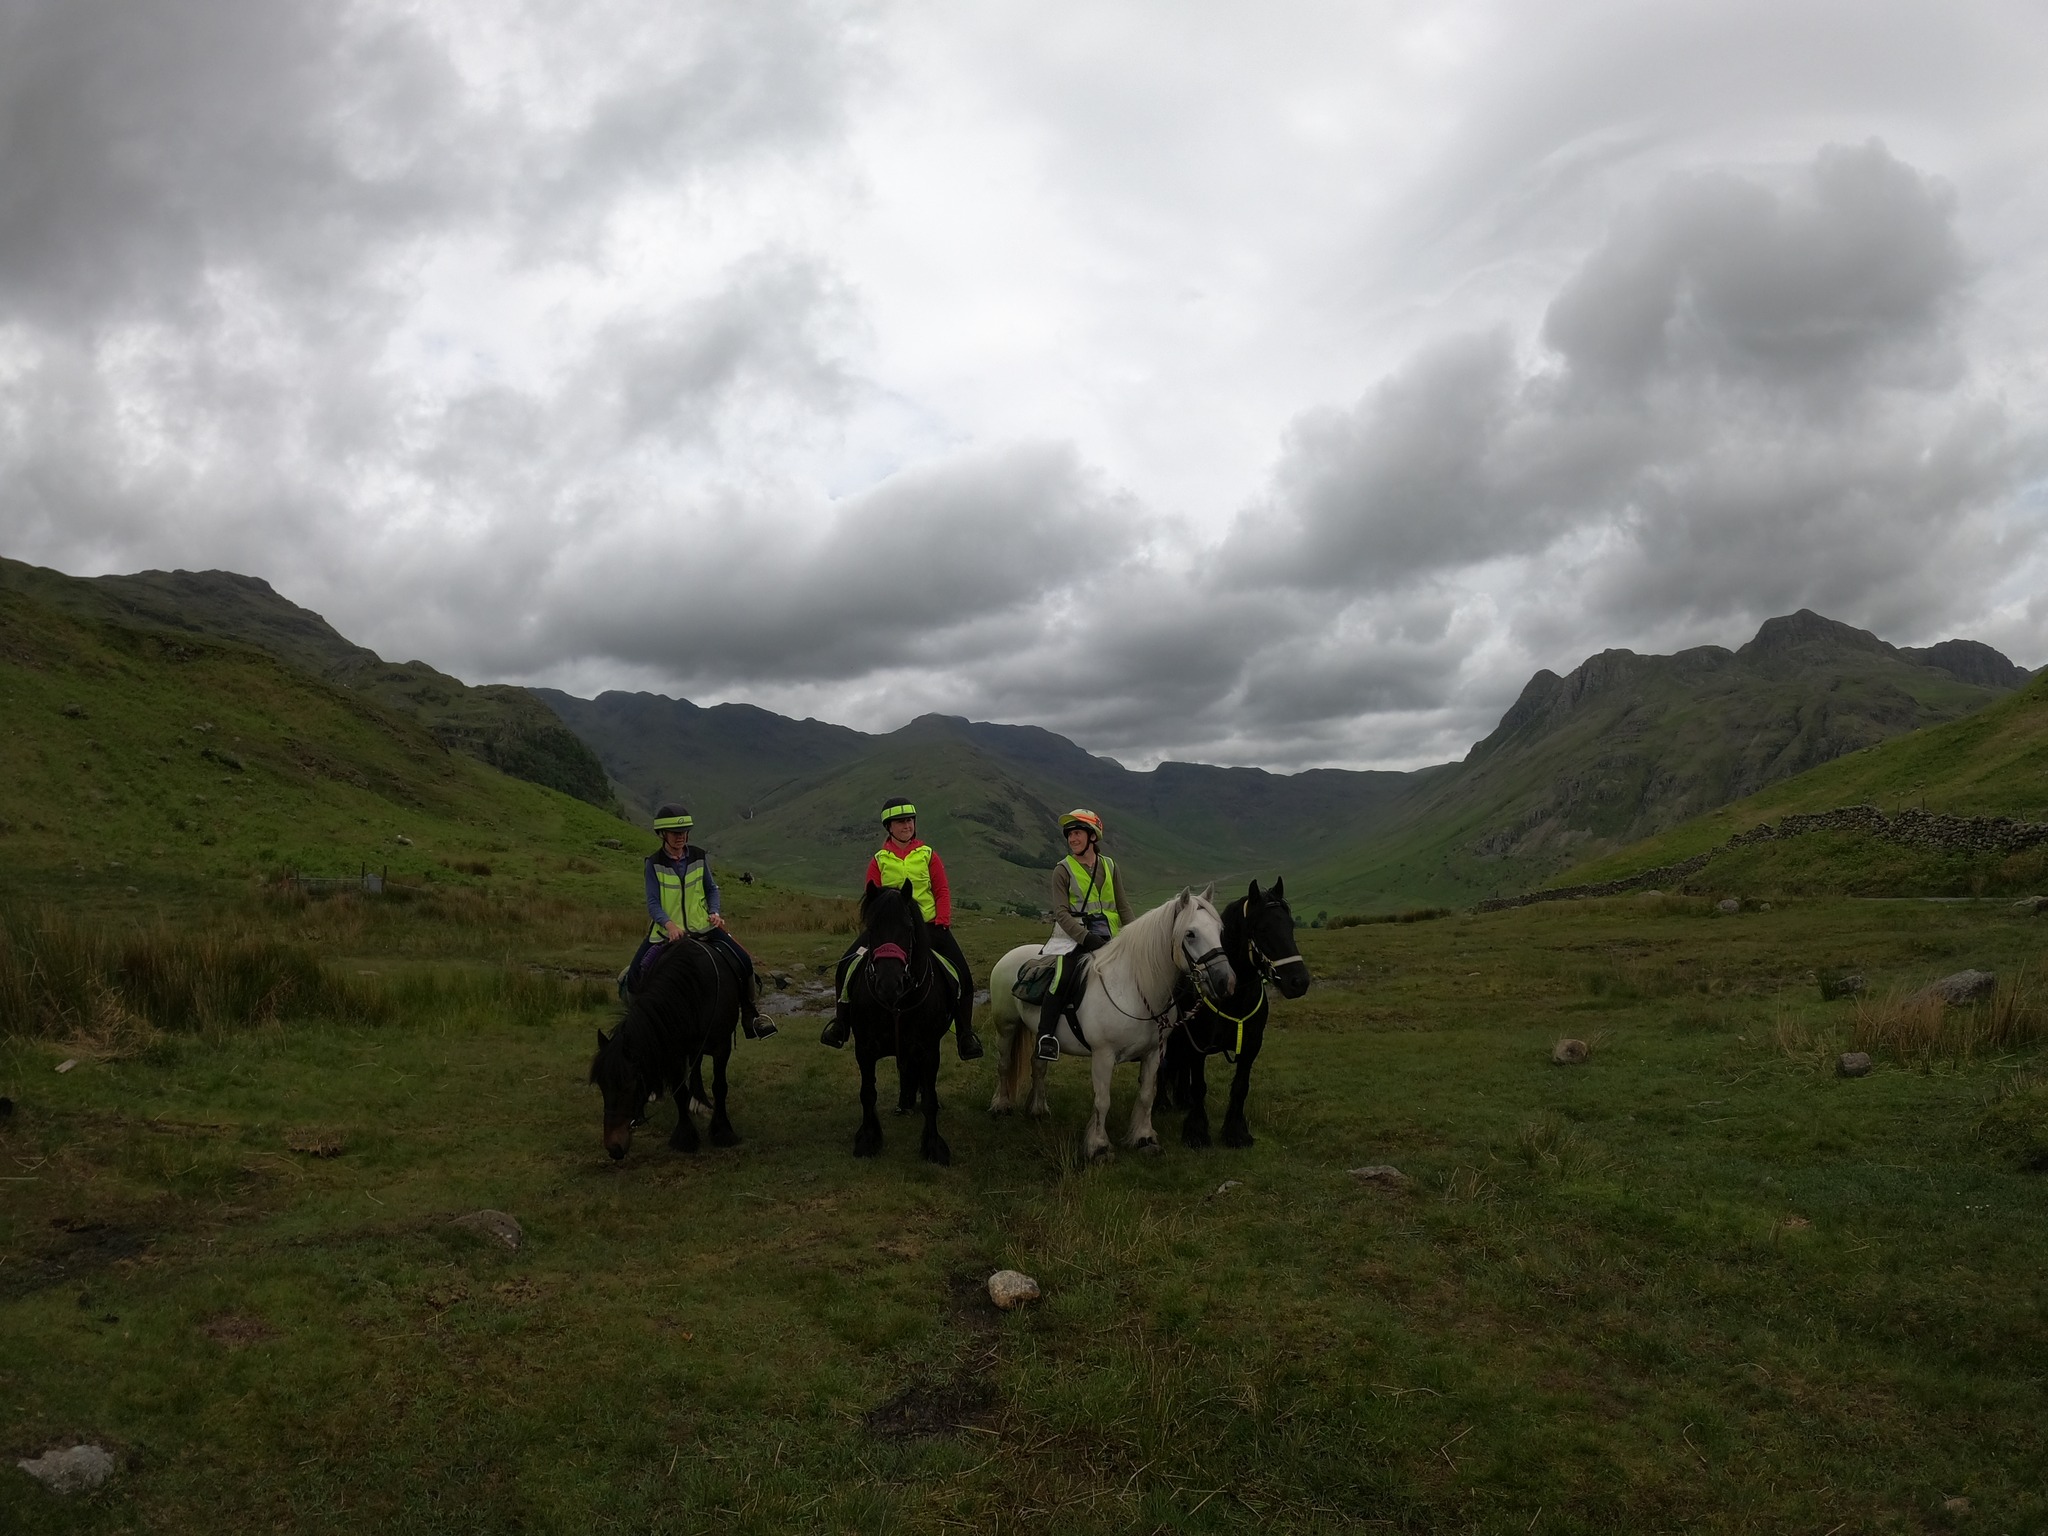 4 ponies and riders in the Lakeland hills